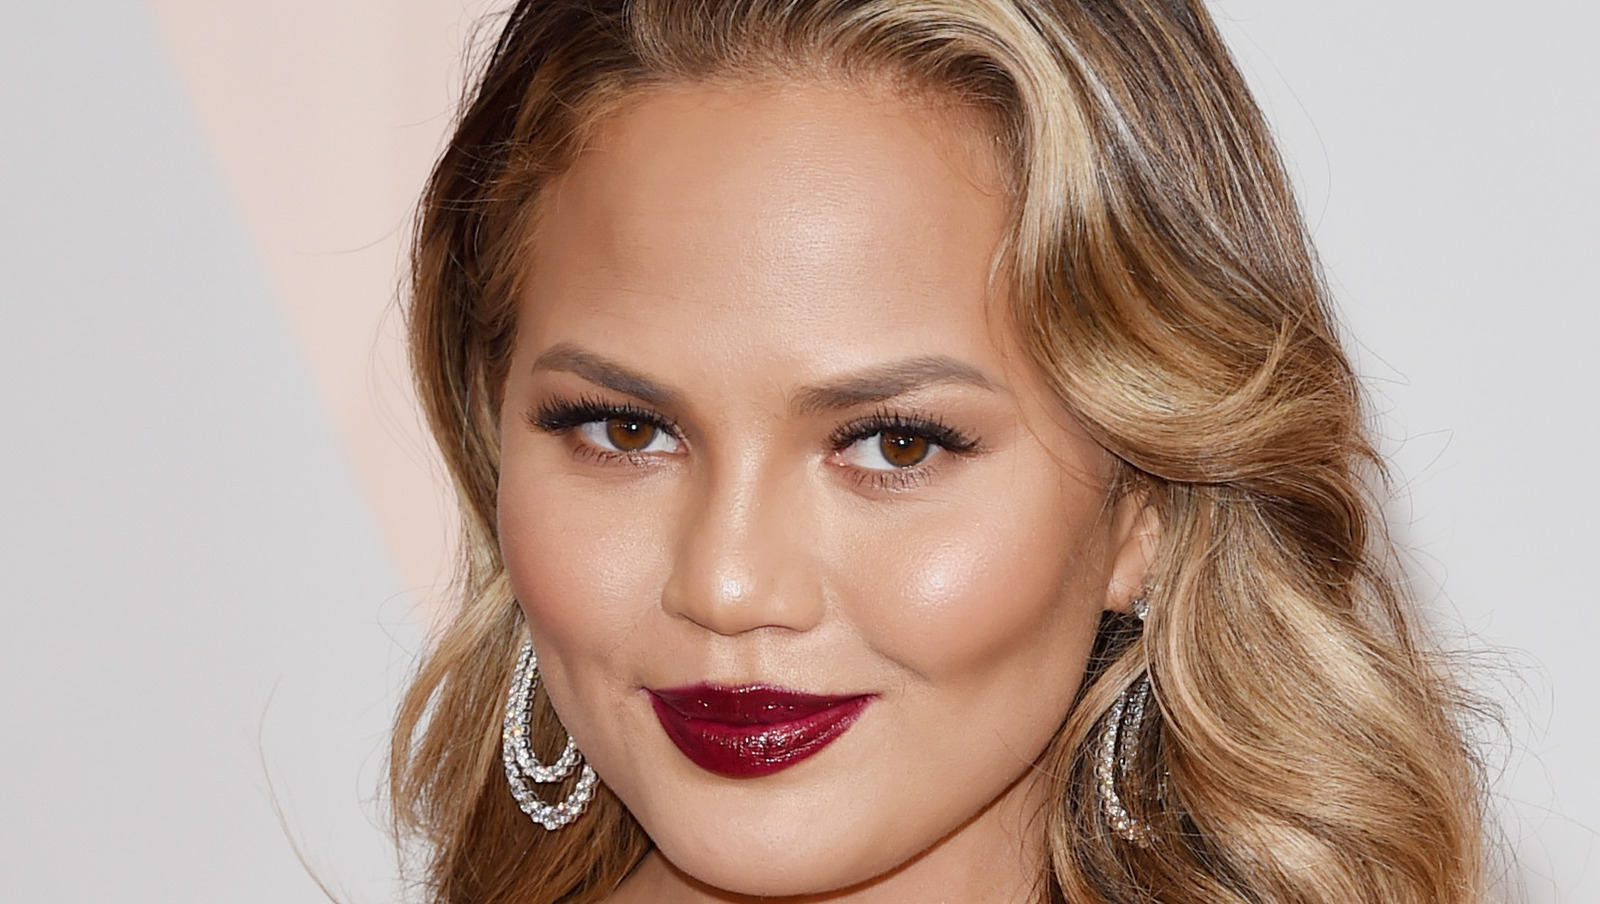 Chrissy Teigen Shares Her Simple Beauty Hack To Get Rid Of Puffy Eyes